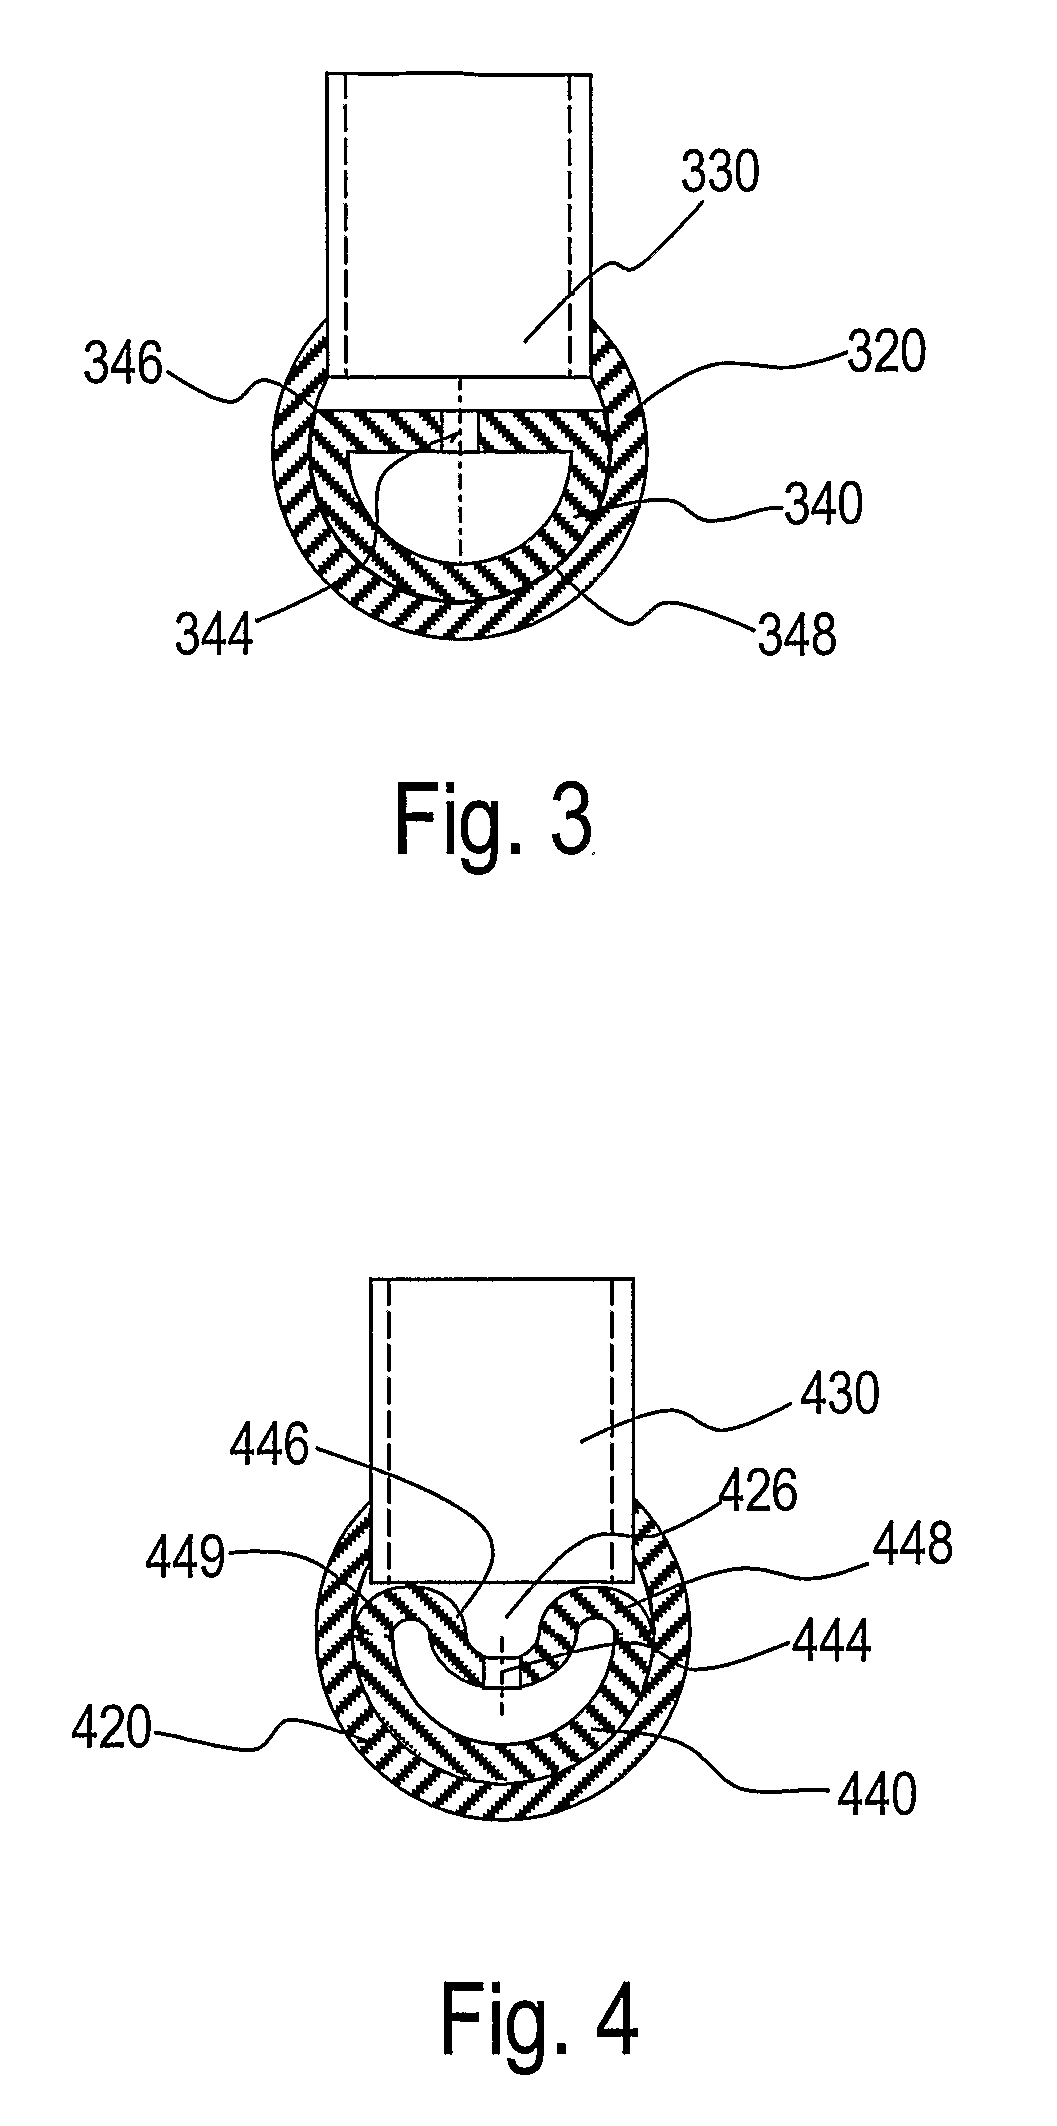 Method and apparatus for improving distribution of fluid in a heat exchanger